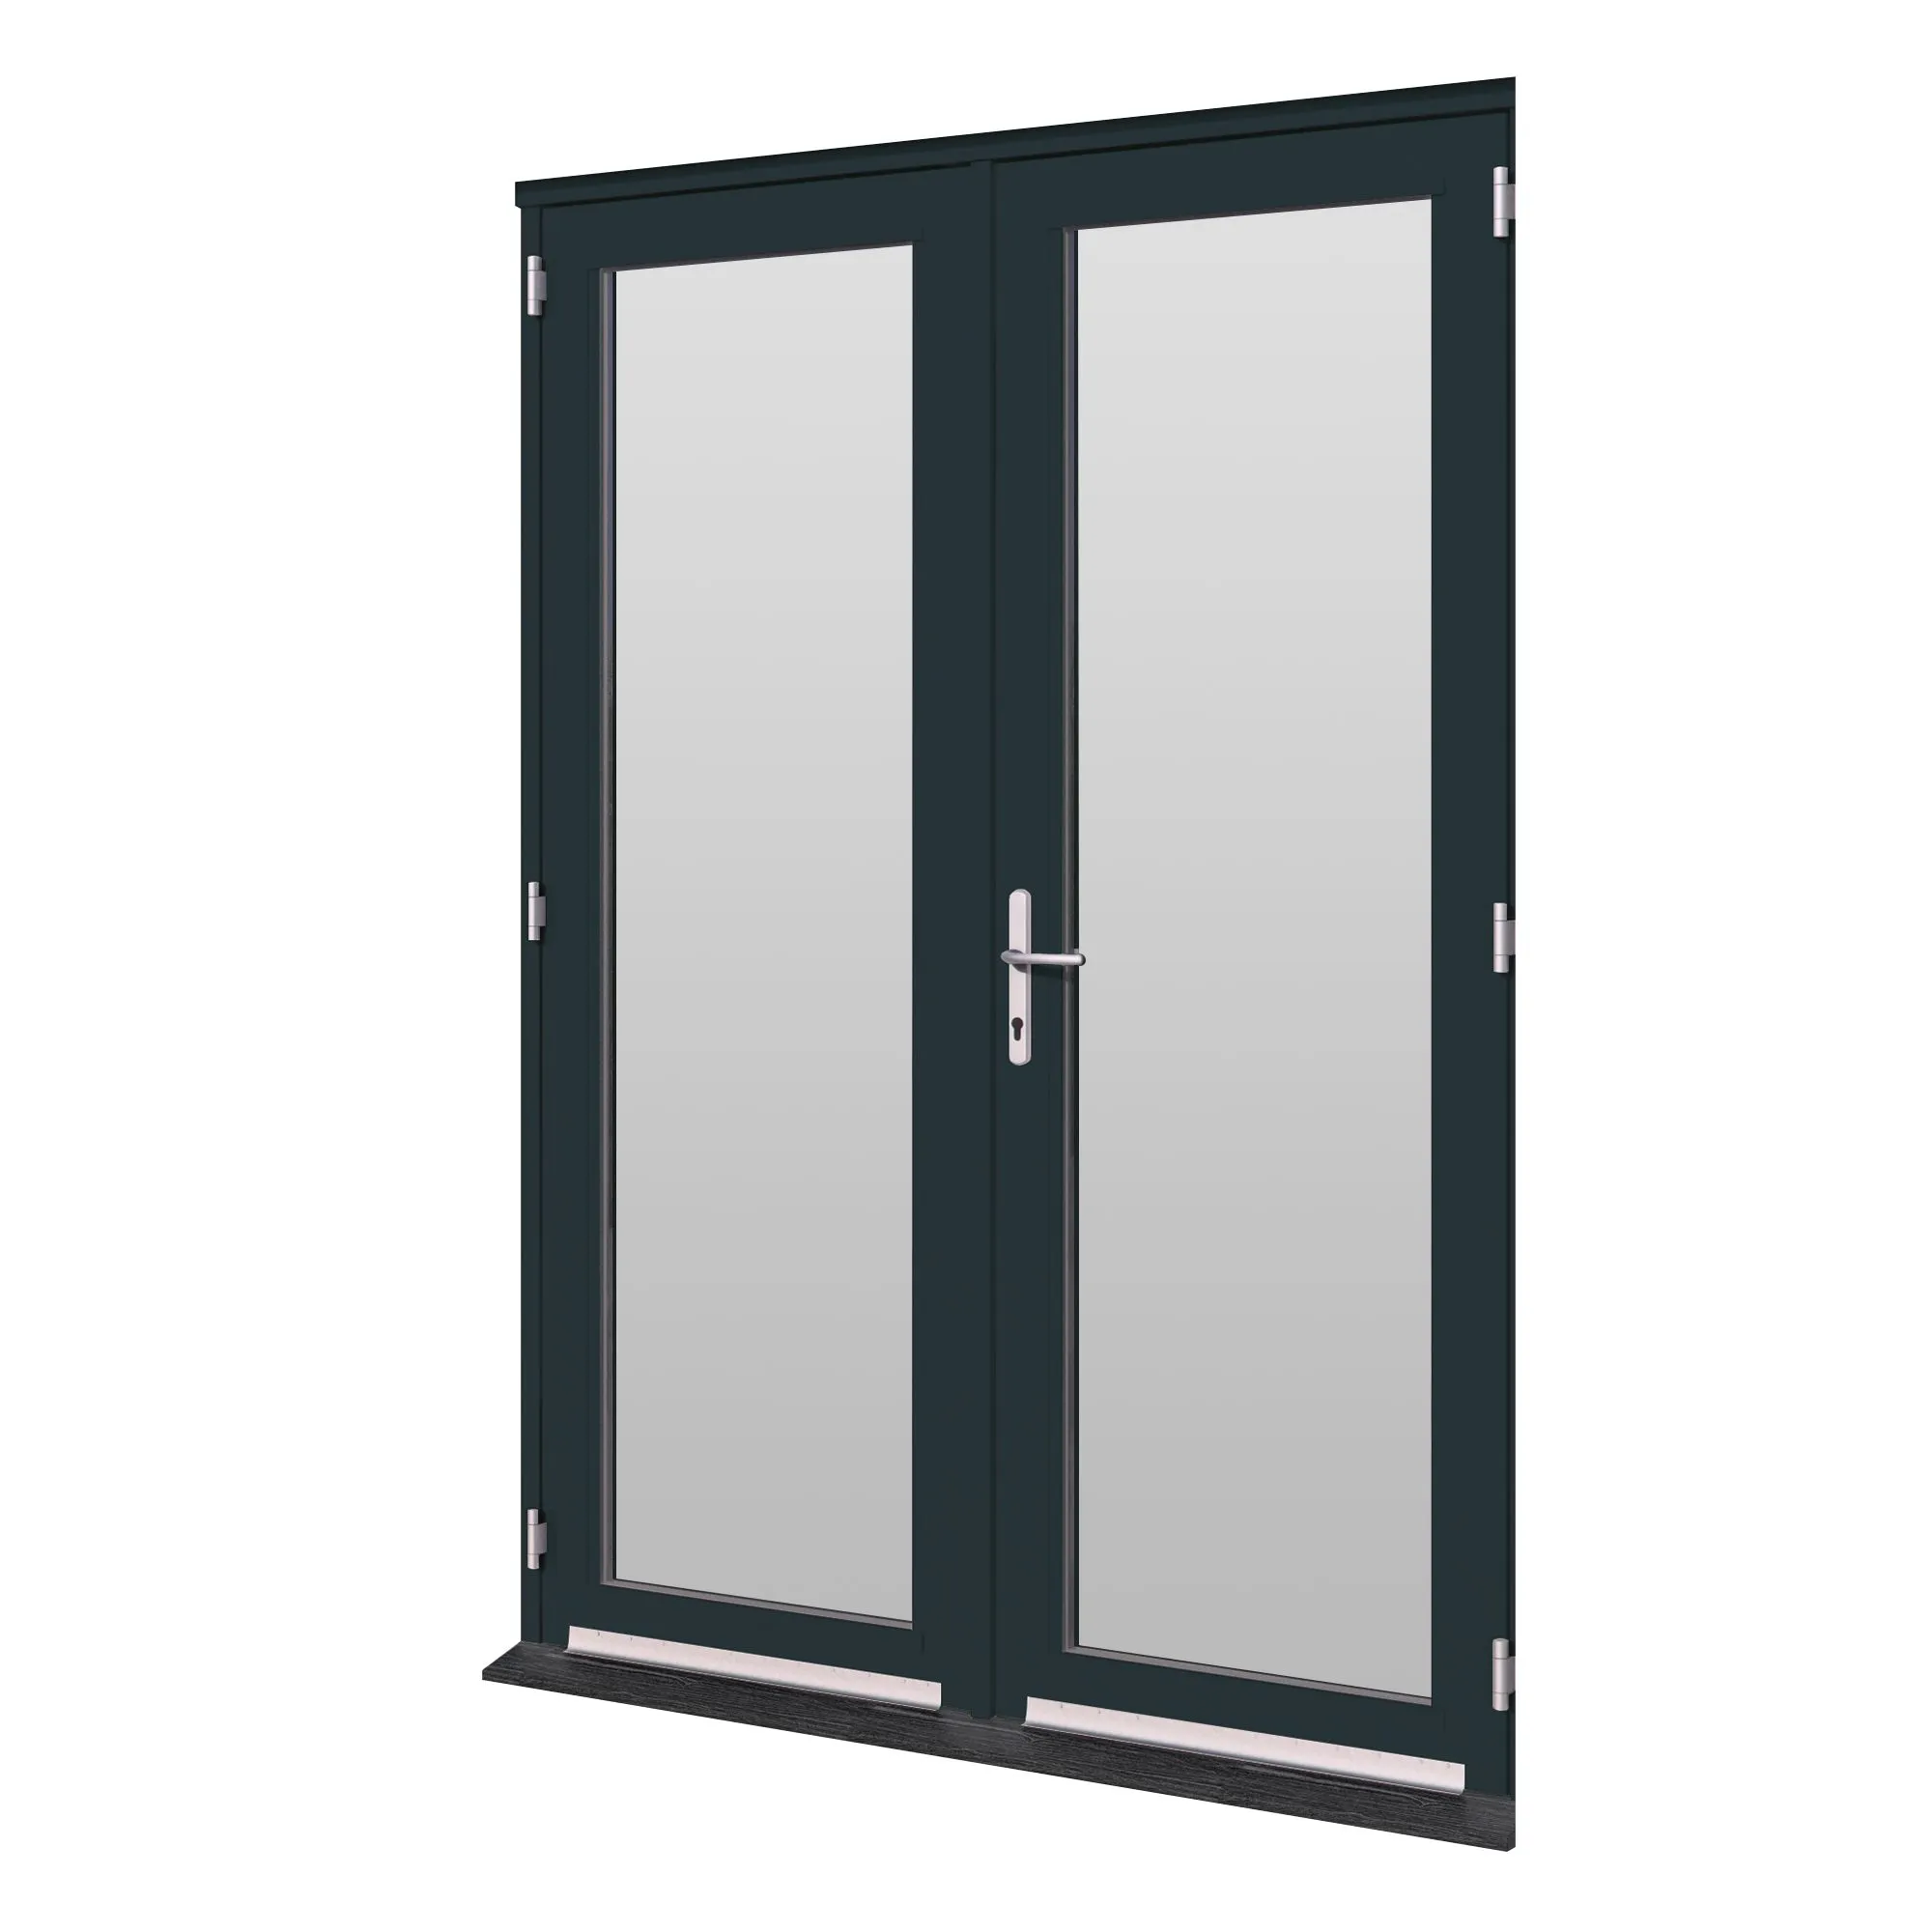 GoodHome Clear Double glazed Grey Hardwood Reversible Patio door & frame, (H)2094mm (W)1794mm